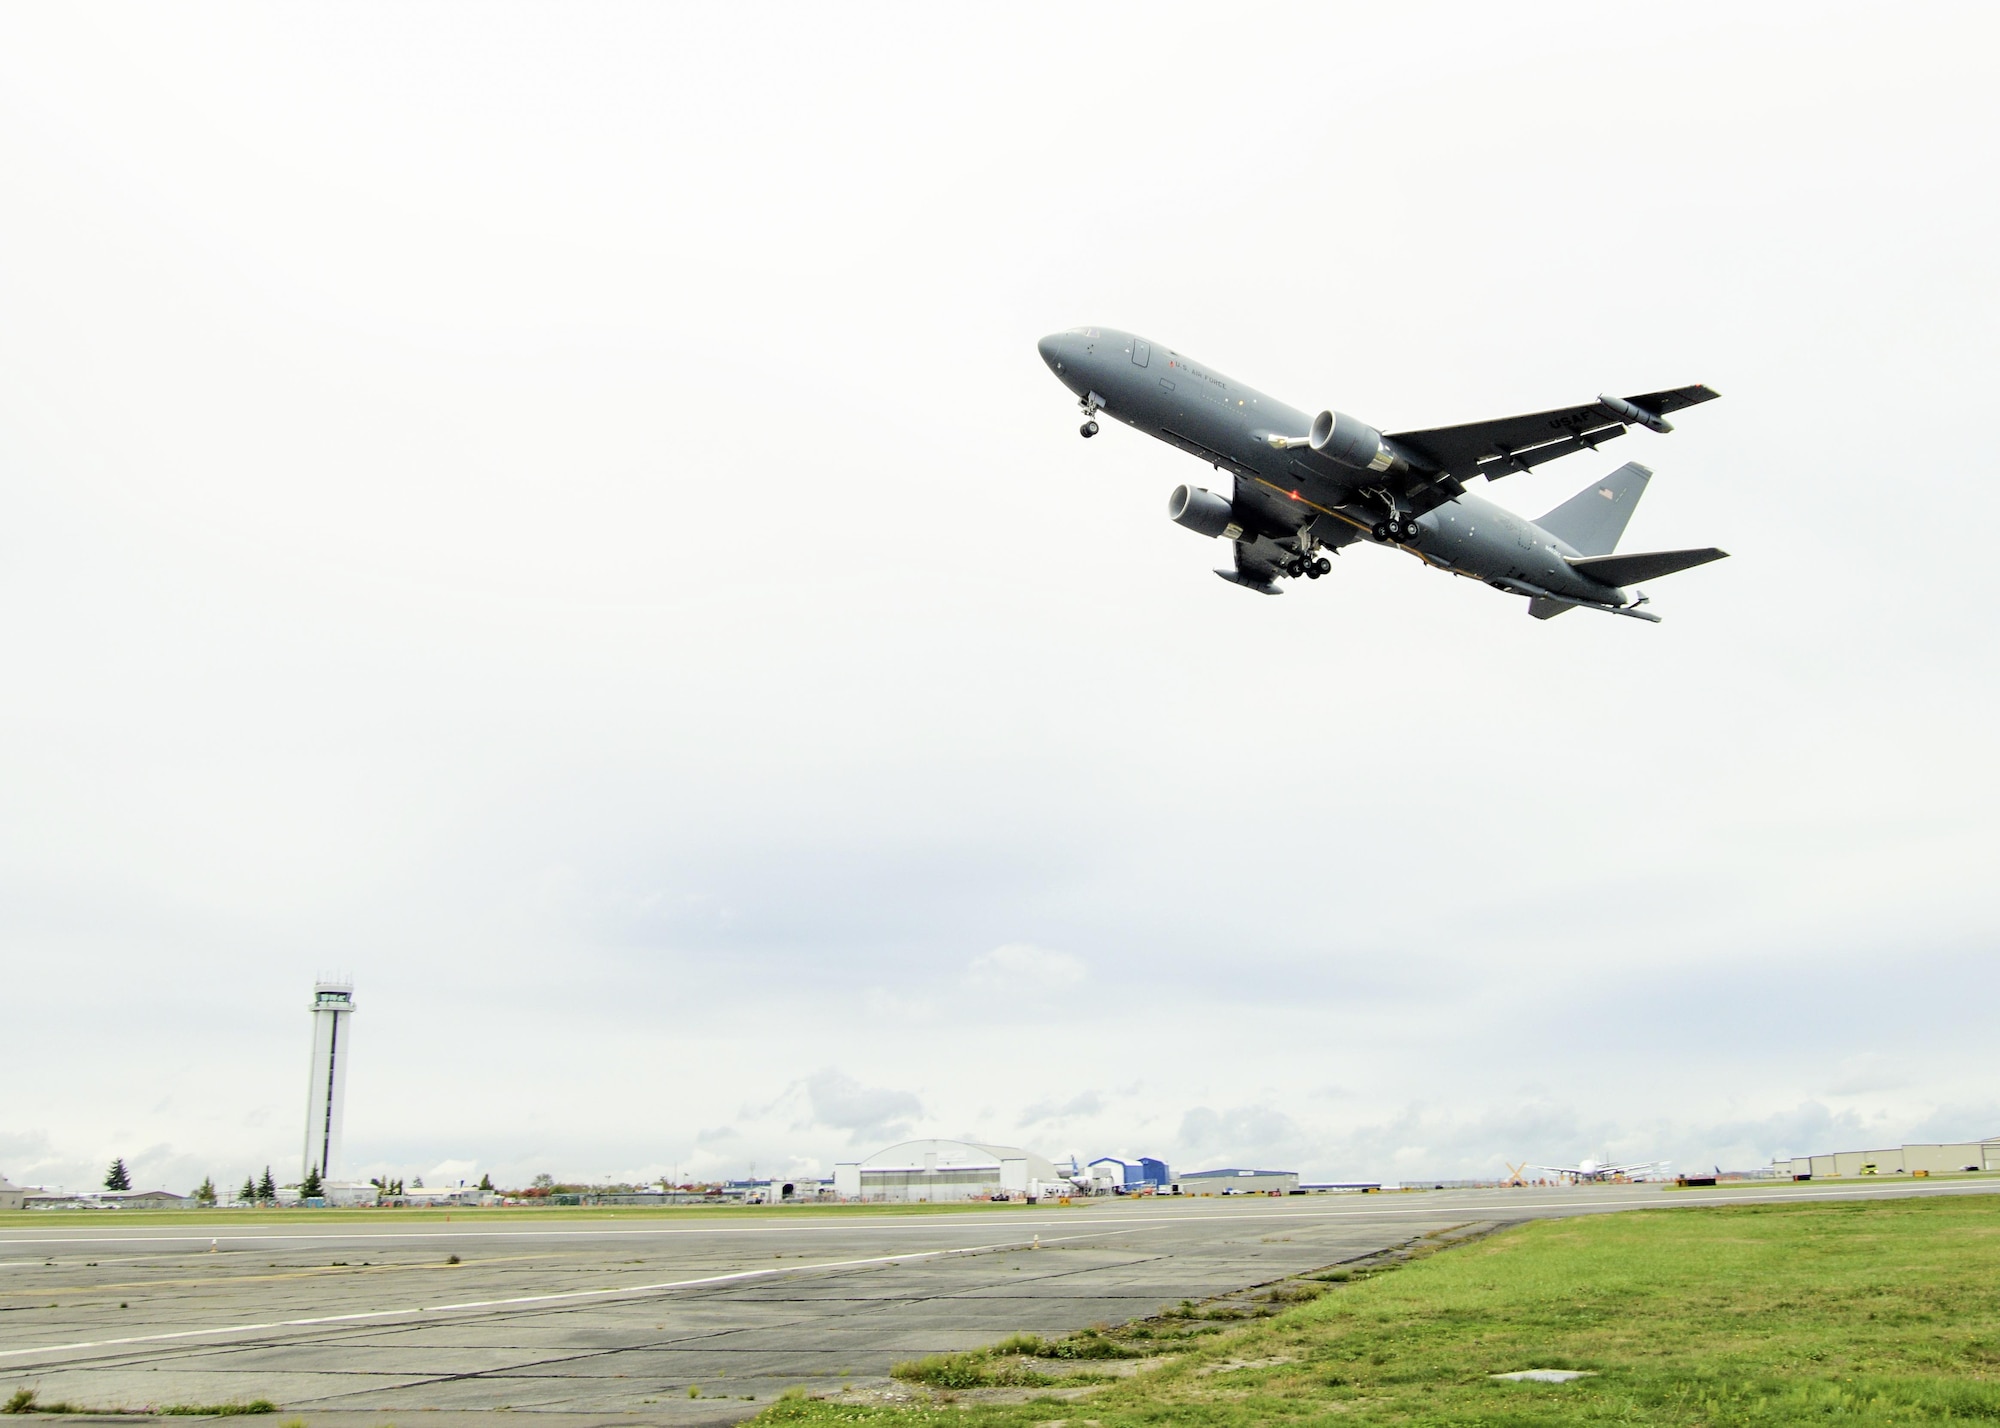 A KC-46 Pegasus took to the skies for its first flight at Paine Field in Everett, Wa., Sept. 25, 2015. (U.S. Air Force photo/Jet Fabara)